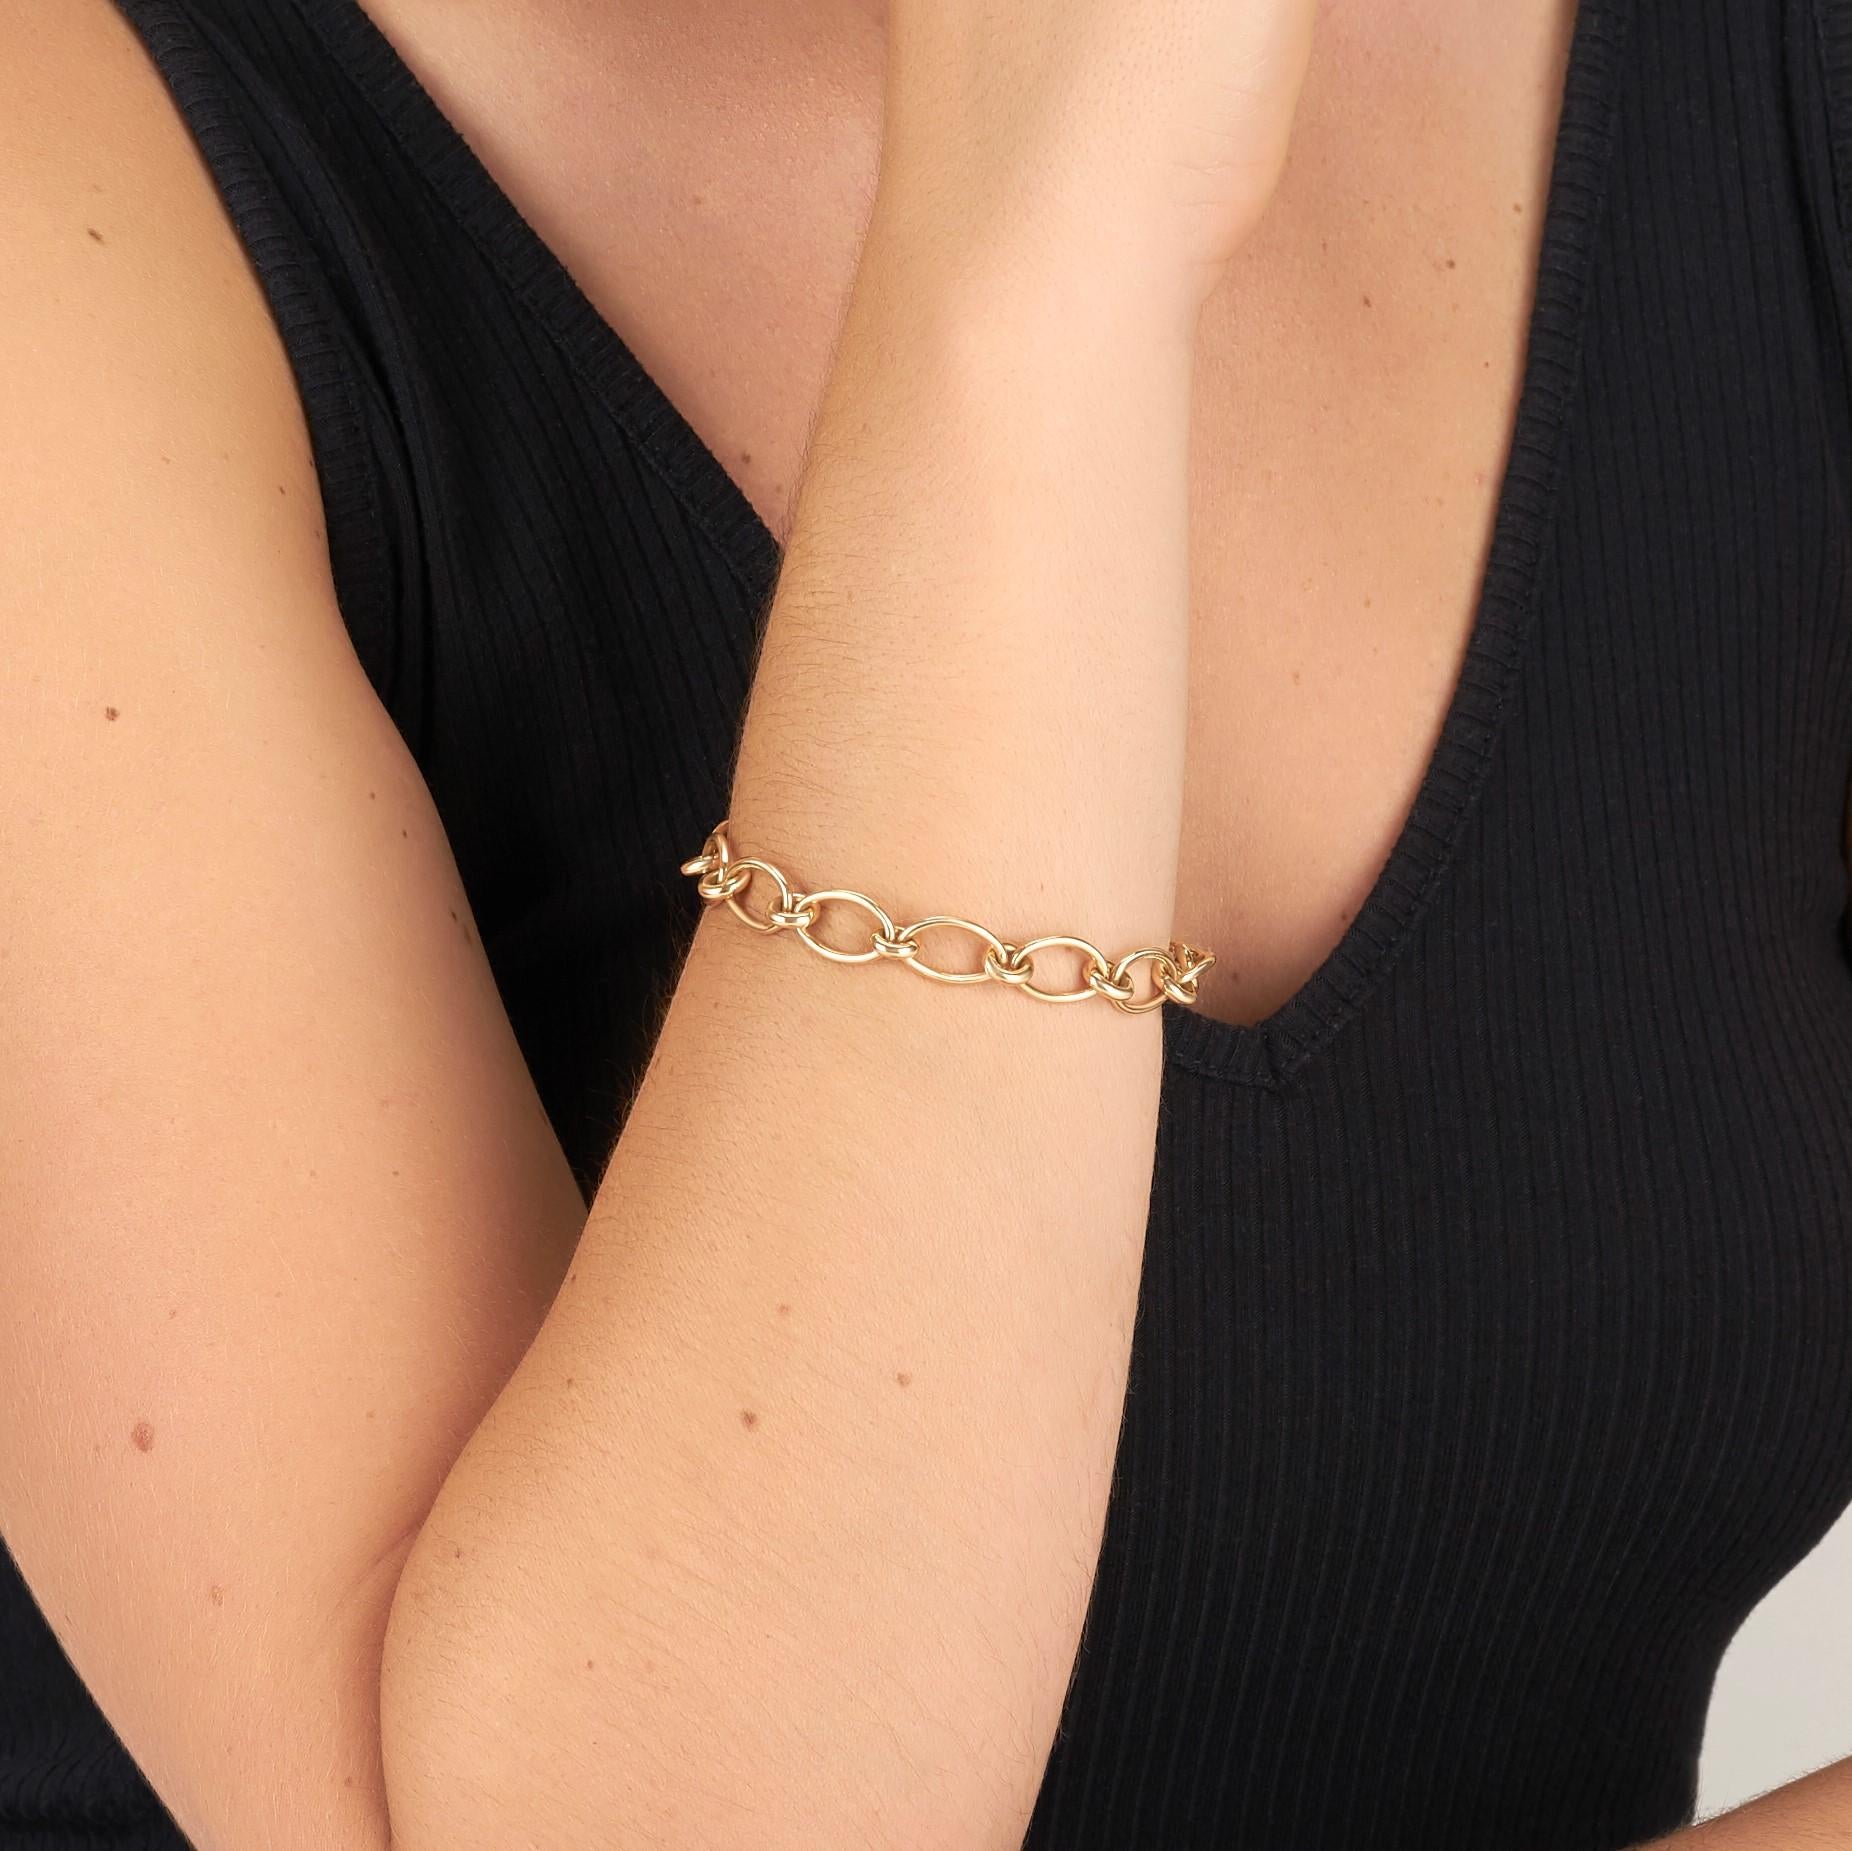 Women's Handcrafted Crew Bracelet in 18K Yellow Gold by Single Stone For Sale